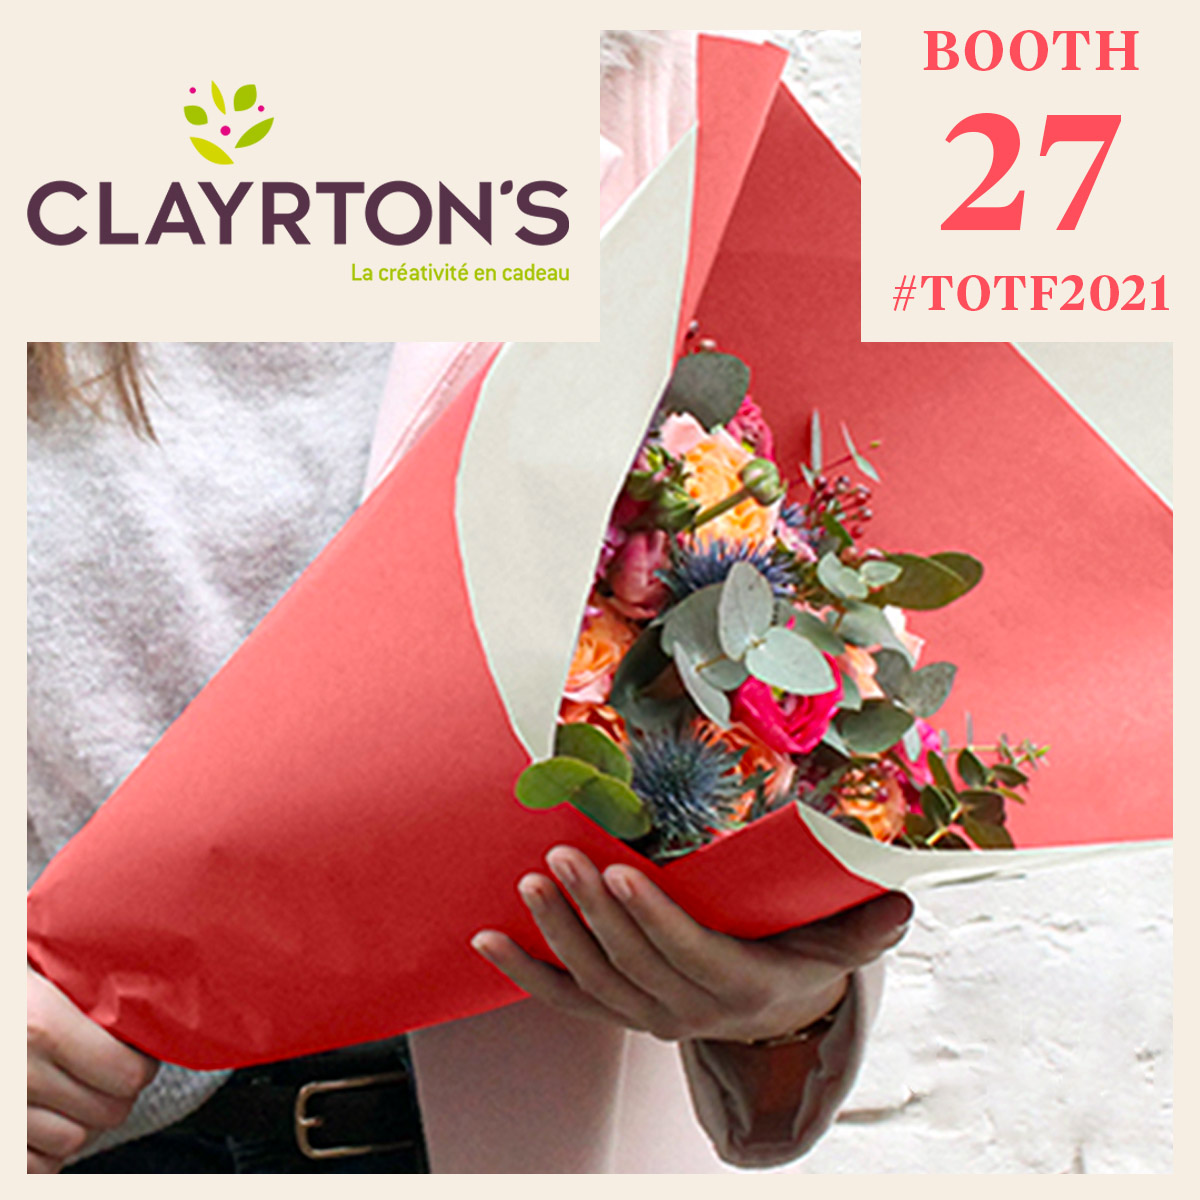 clayrtons-creativity-as-a-gift-2-featured